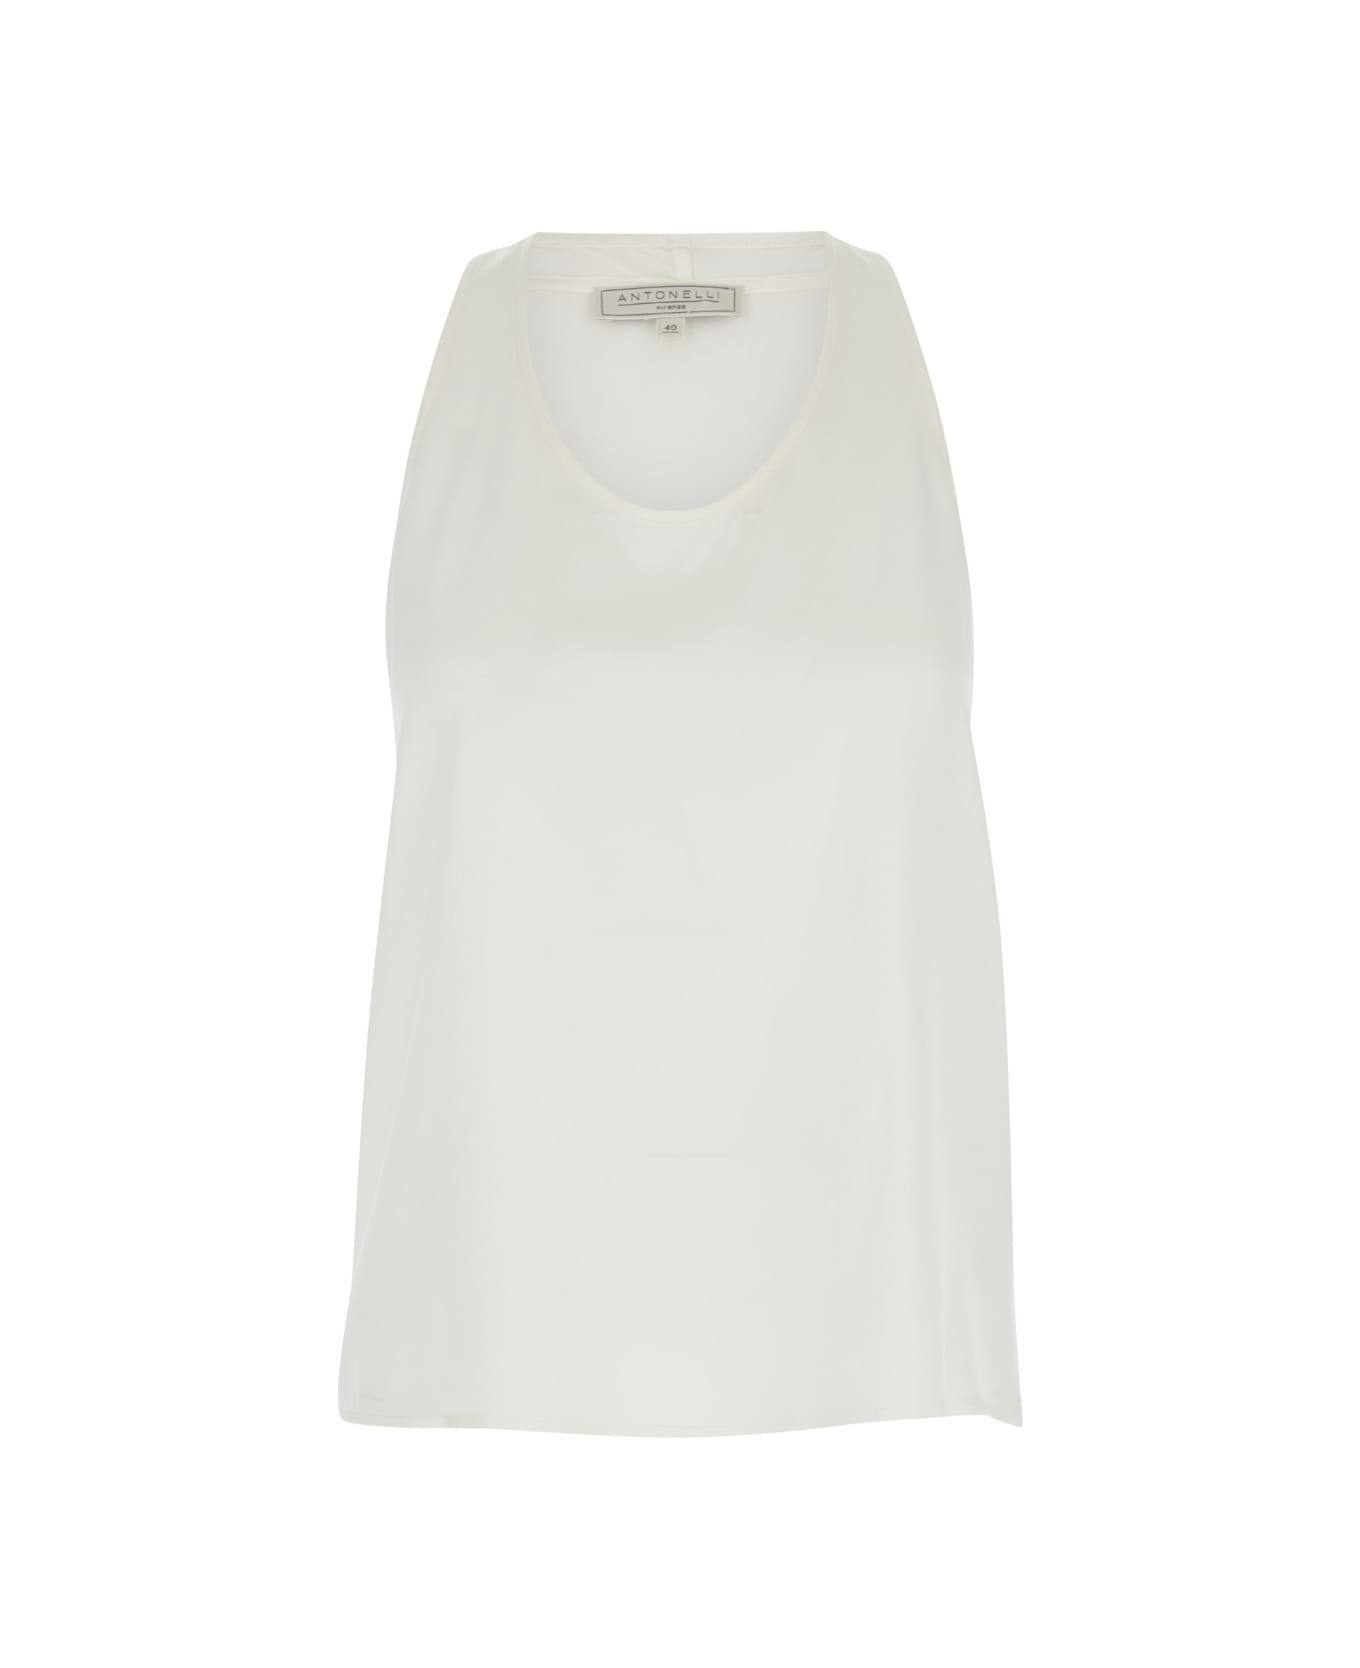 Antonelli White Sleeveless And Flared Top In Silk Blend Woman - White